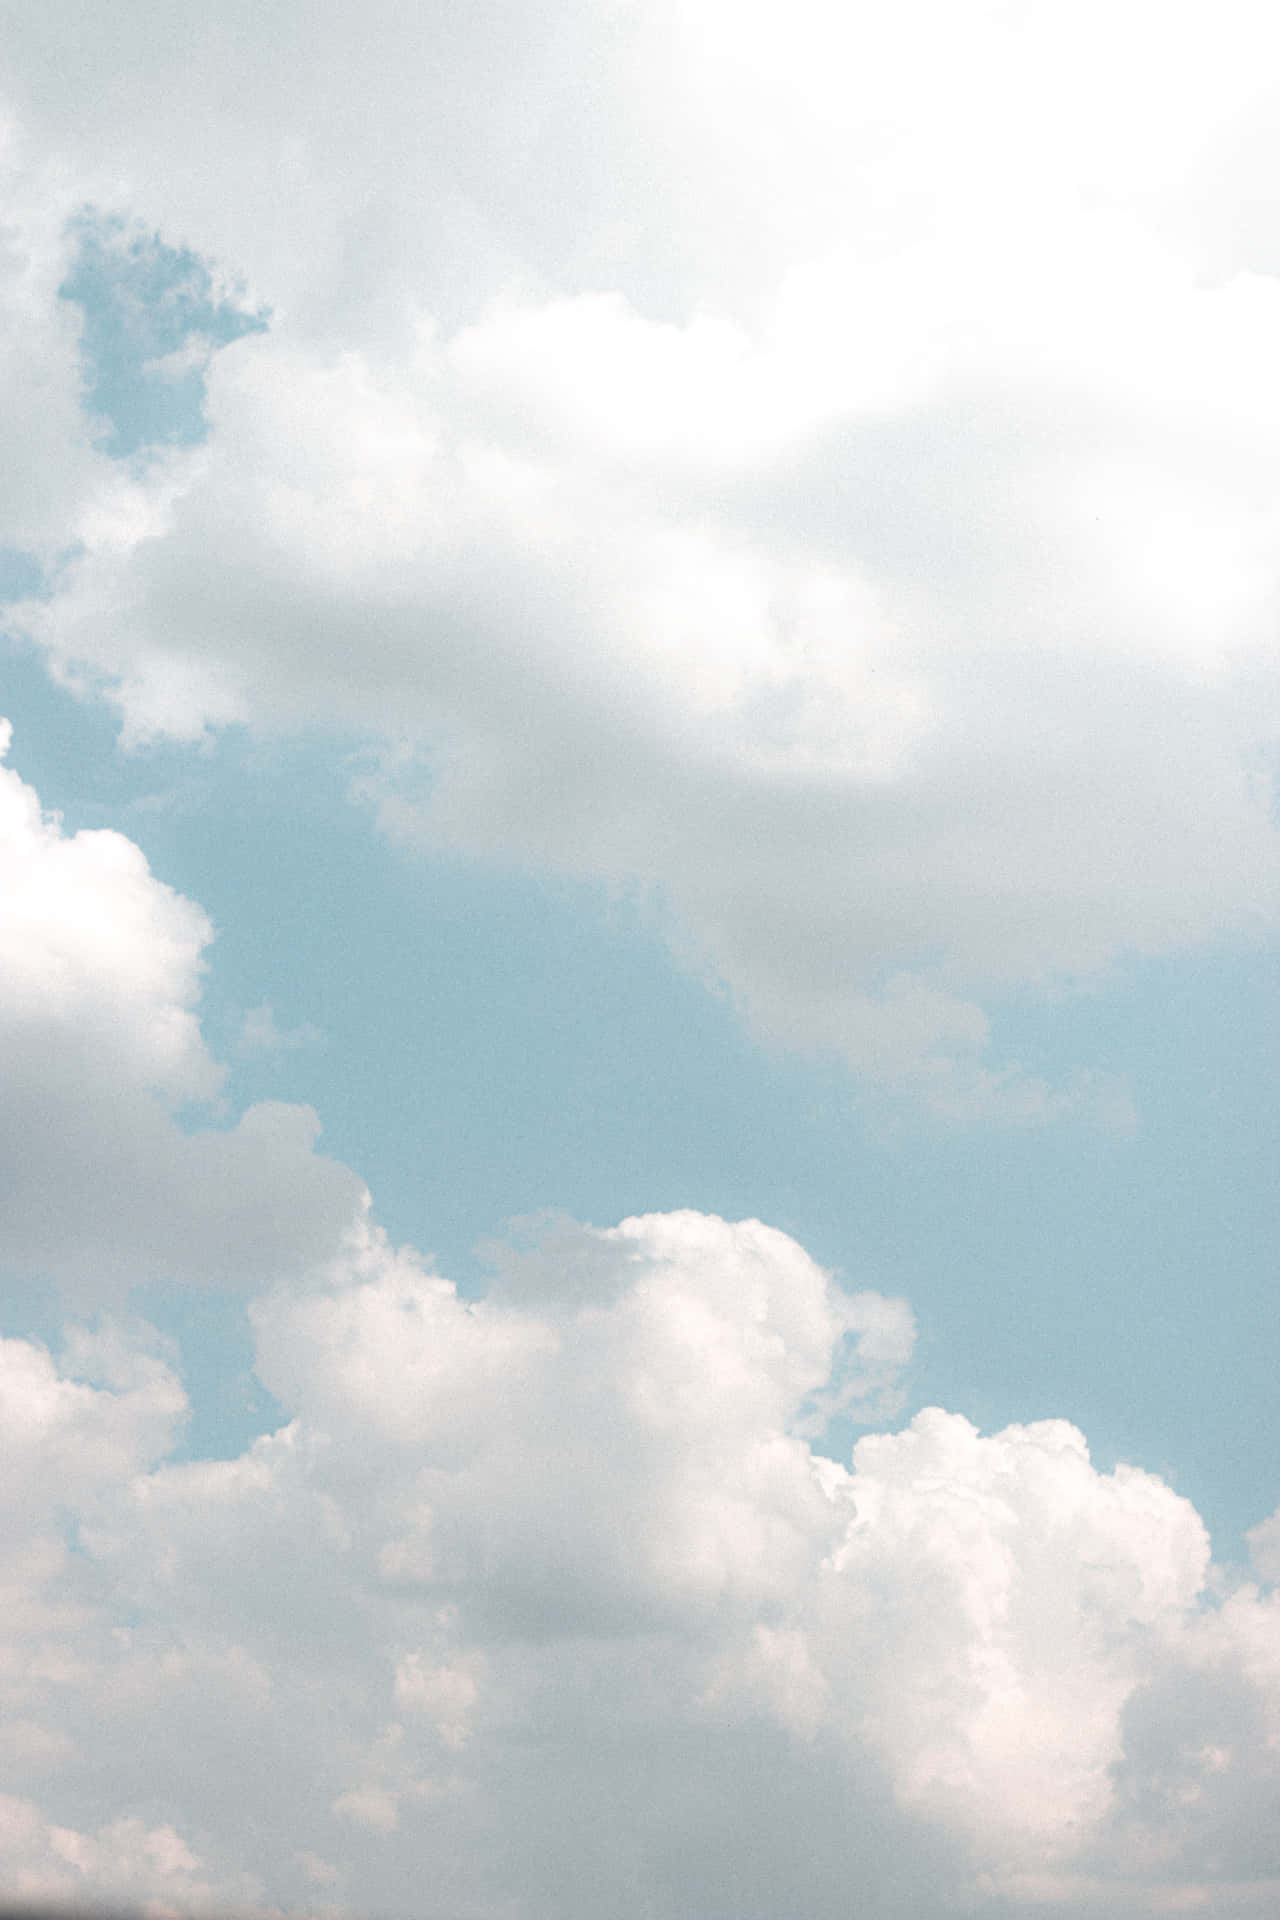 White Clouds In Sky Wallpaper